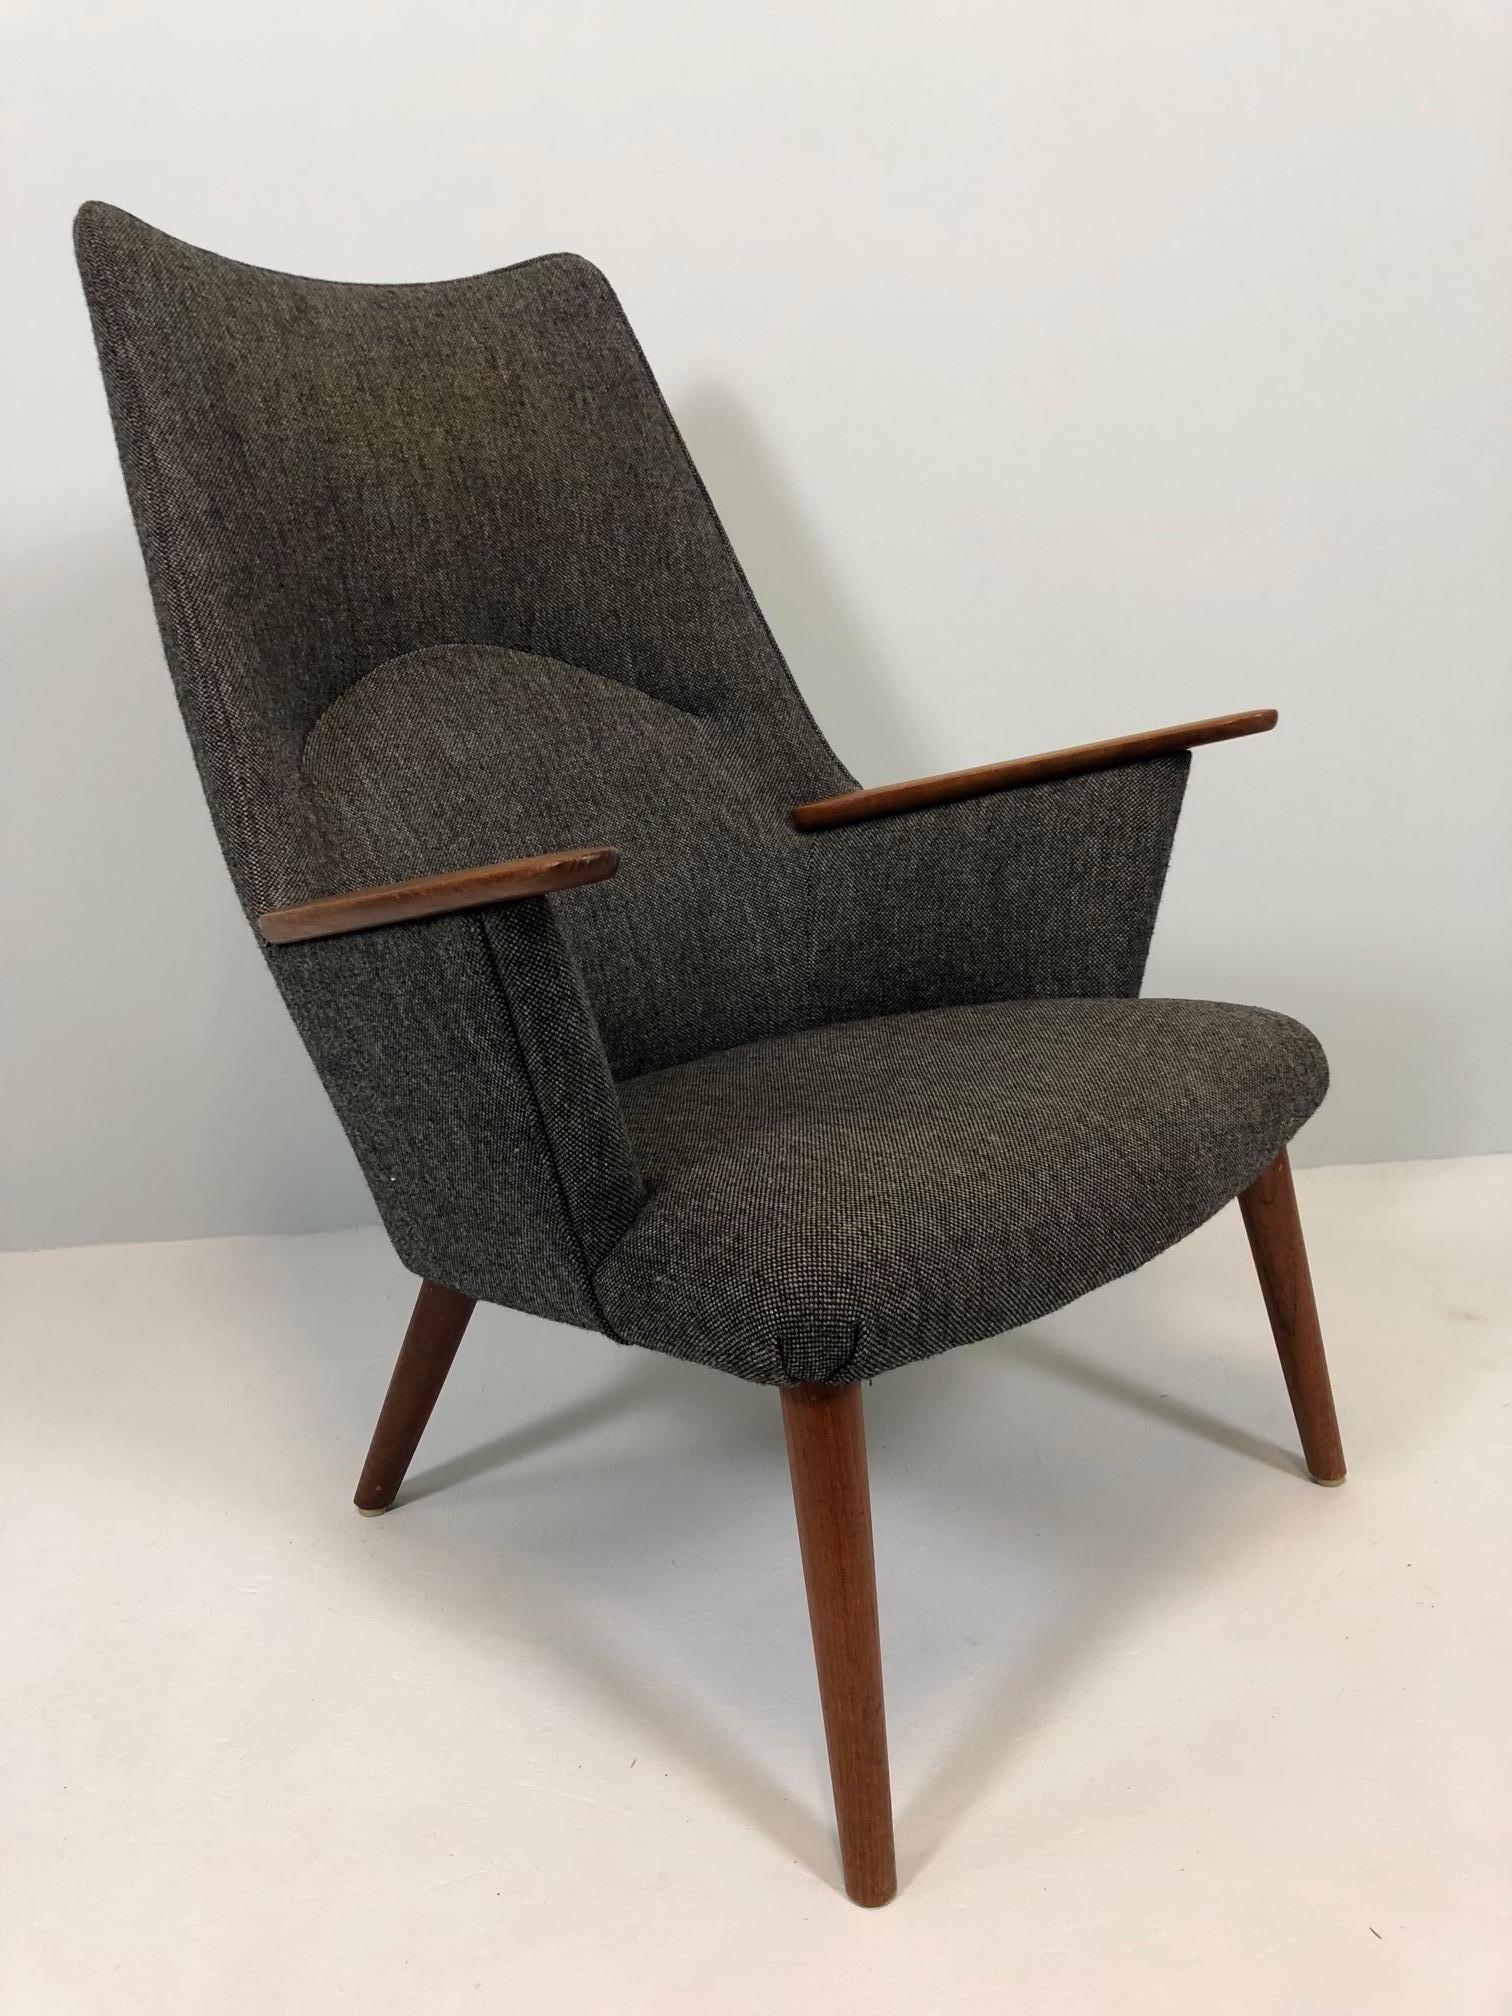 Hans Wegner AP-27 Armchair by A.P. Stolen In Good Condition For Sale In Berne, CH